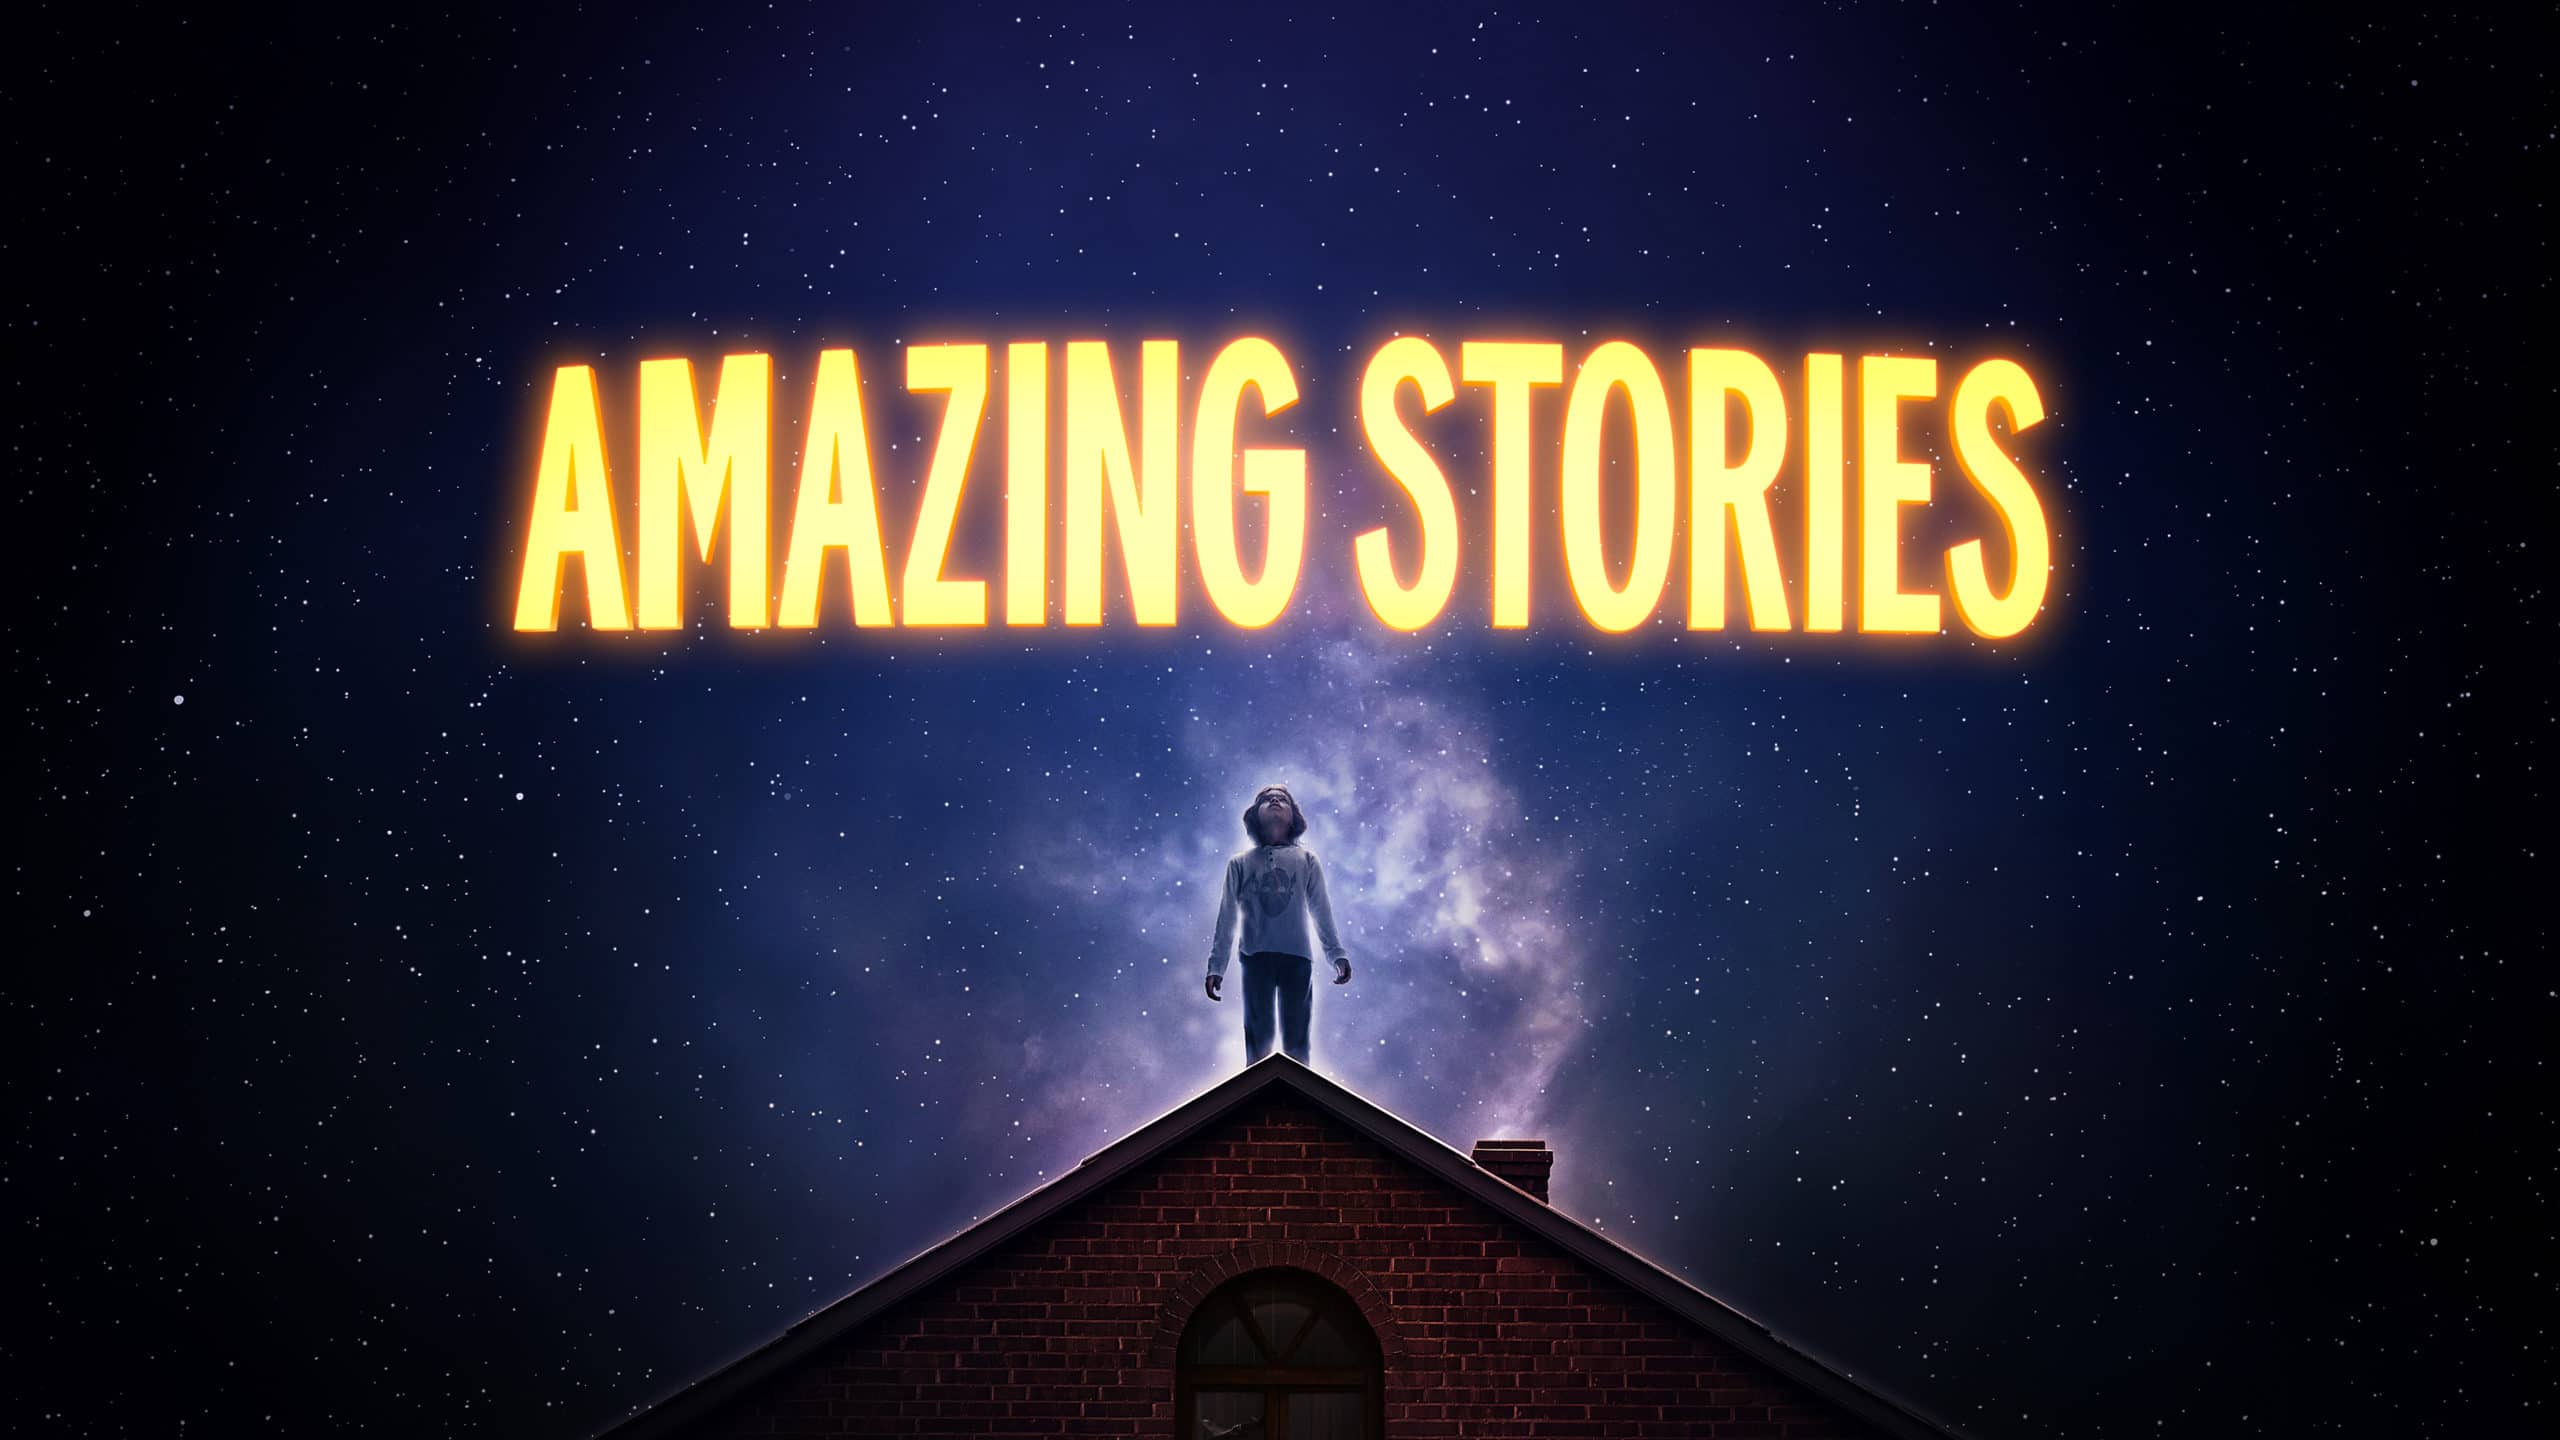 Apple TV +: 1st episode of “Amazing Stories” now available;  2nd season of "Truth Be Told" is confirmed